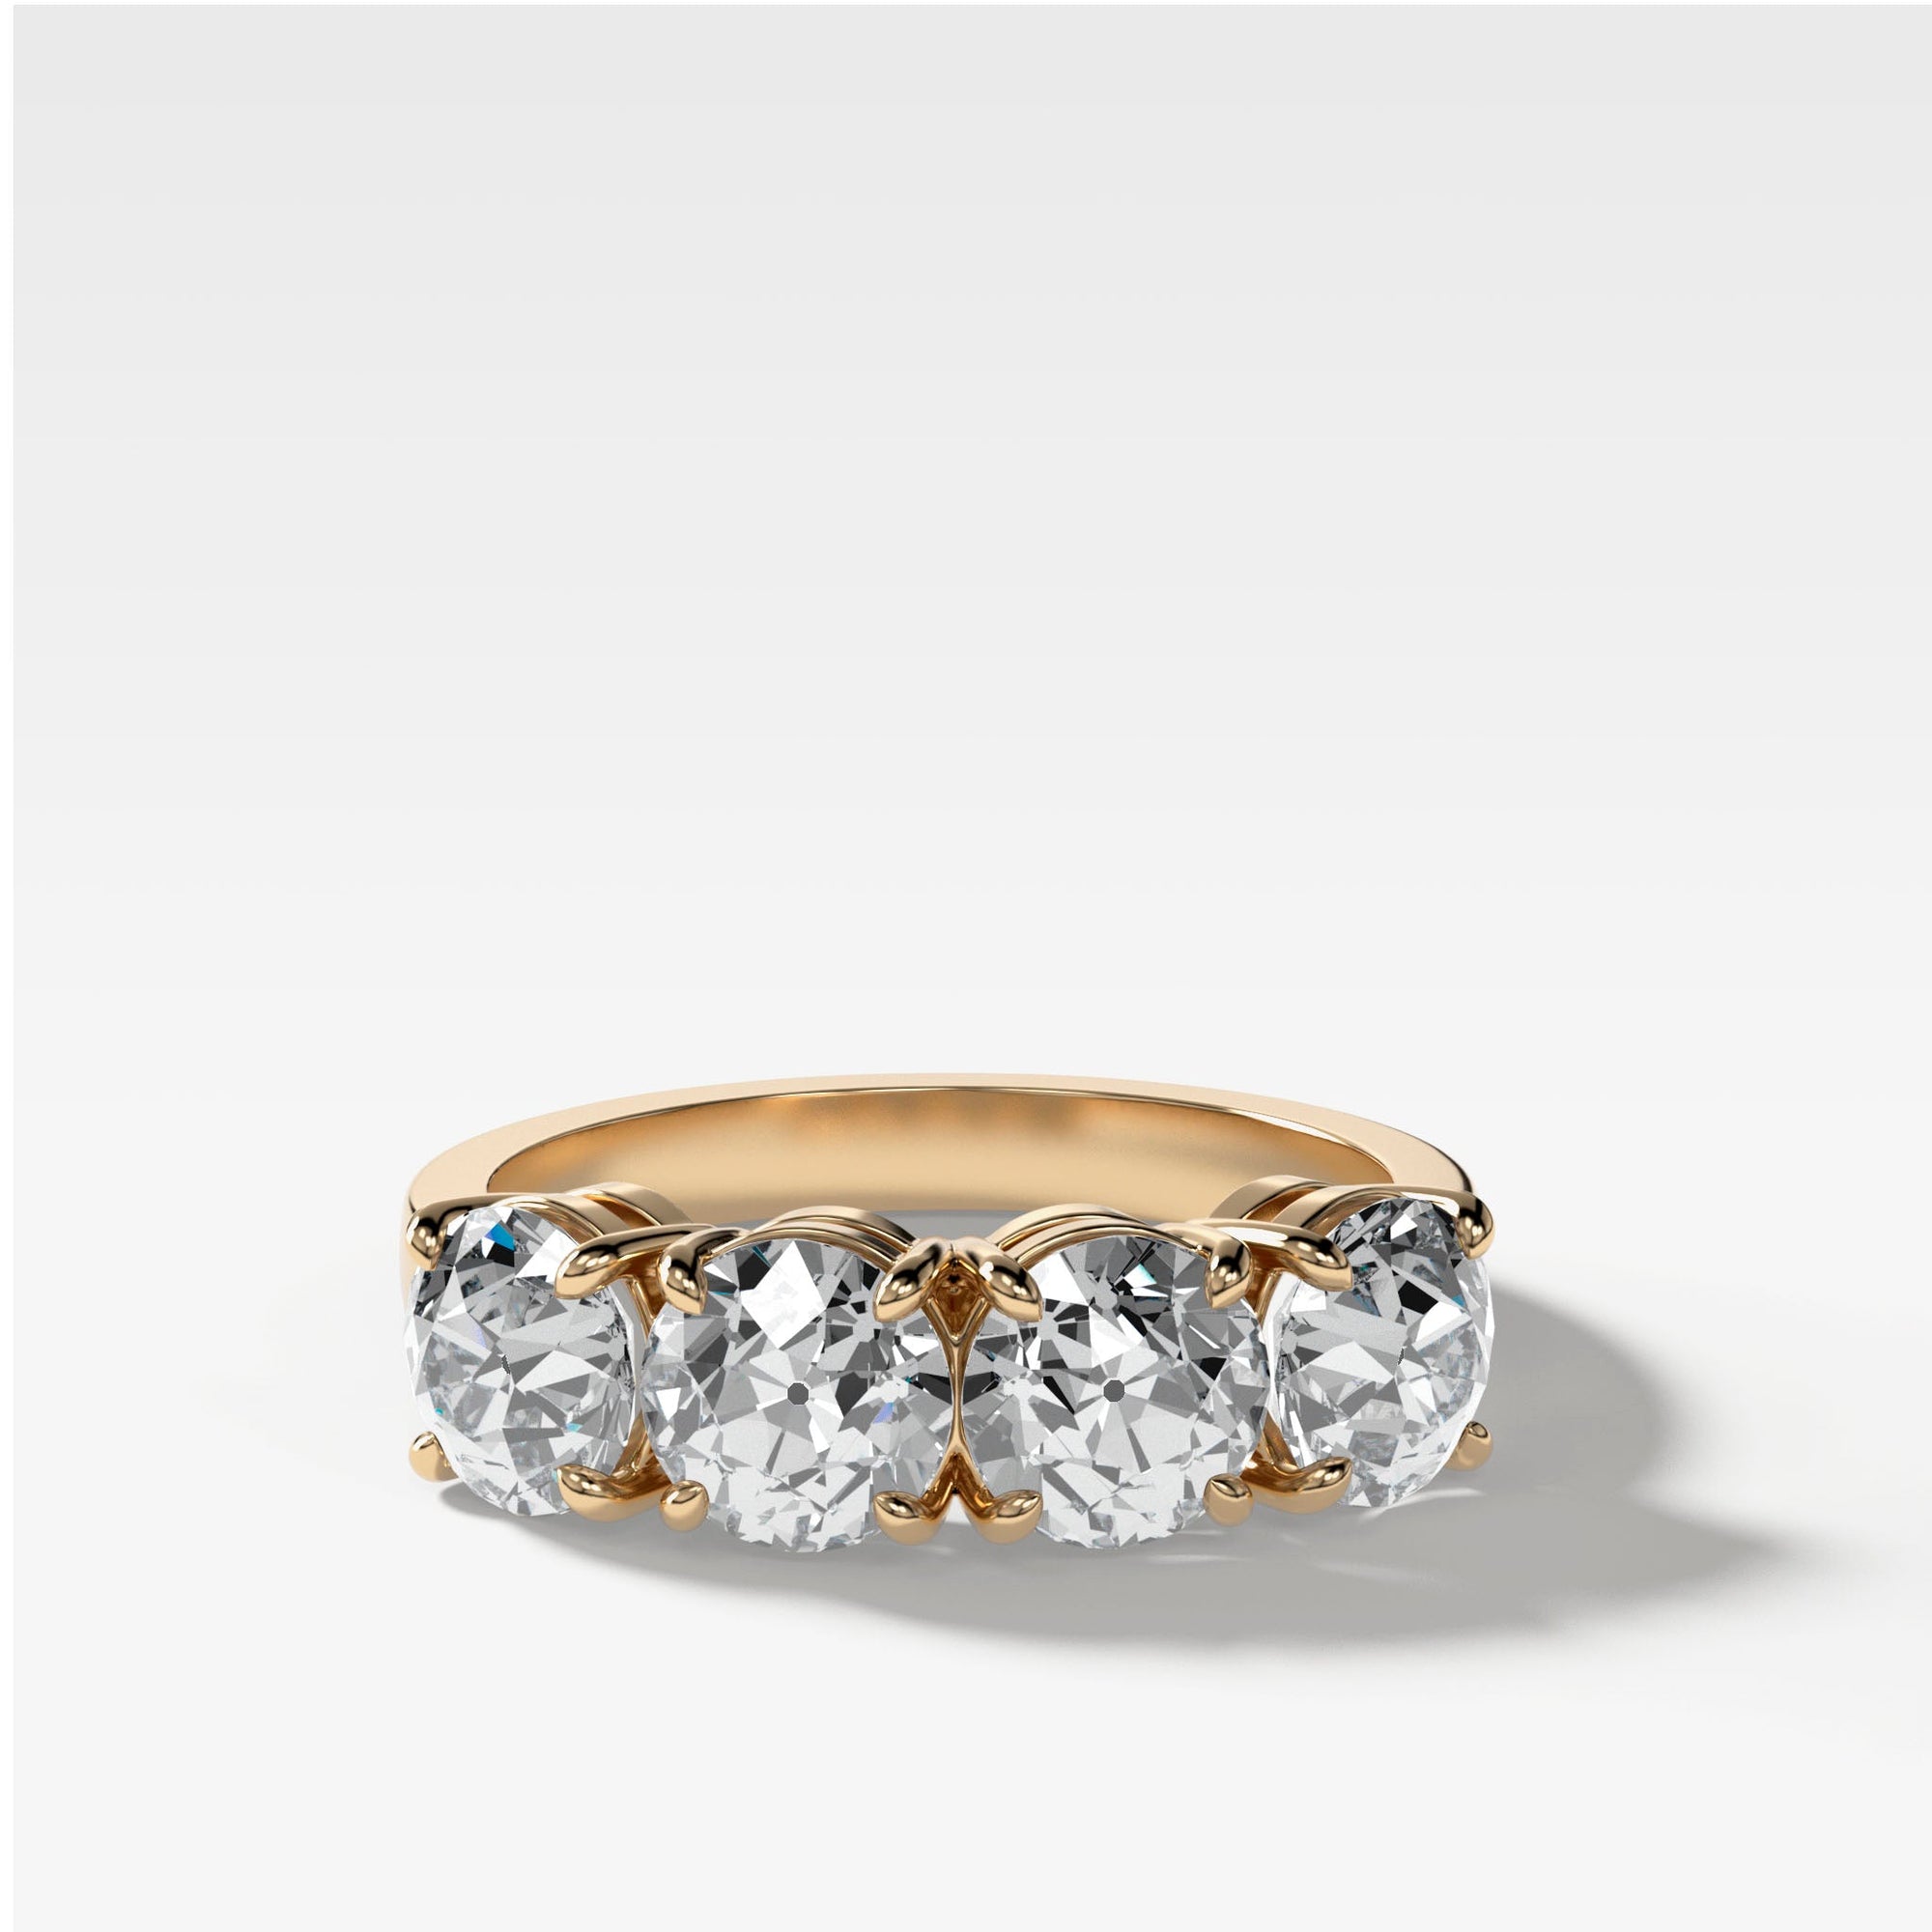 Four Stone Diamond Wedding Band With Old Euro Cuts in Yellow Gold by Good Stone